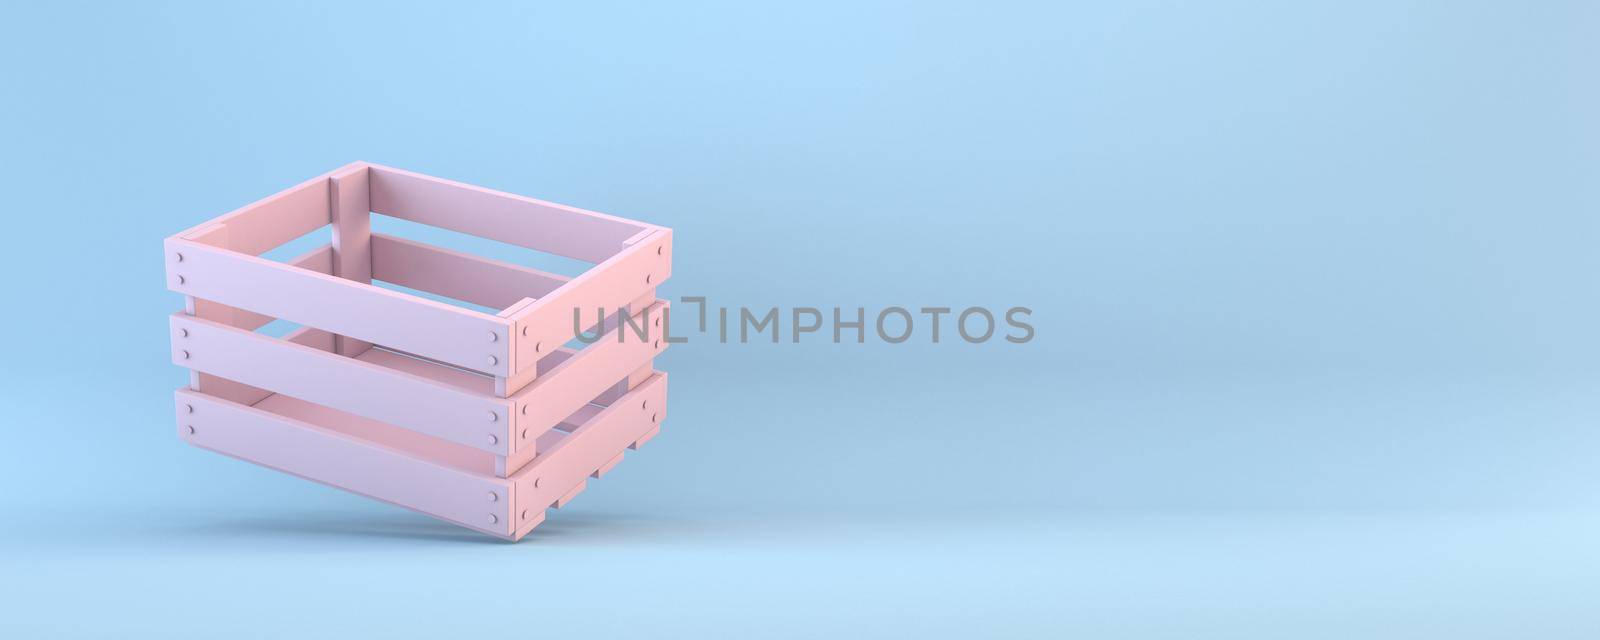 Empty wooden crate 3D rendering illustration isolated on blue background